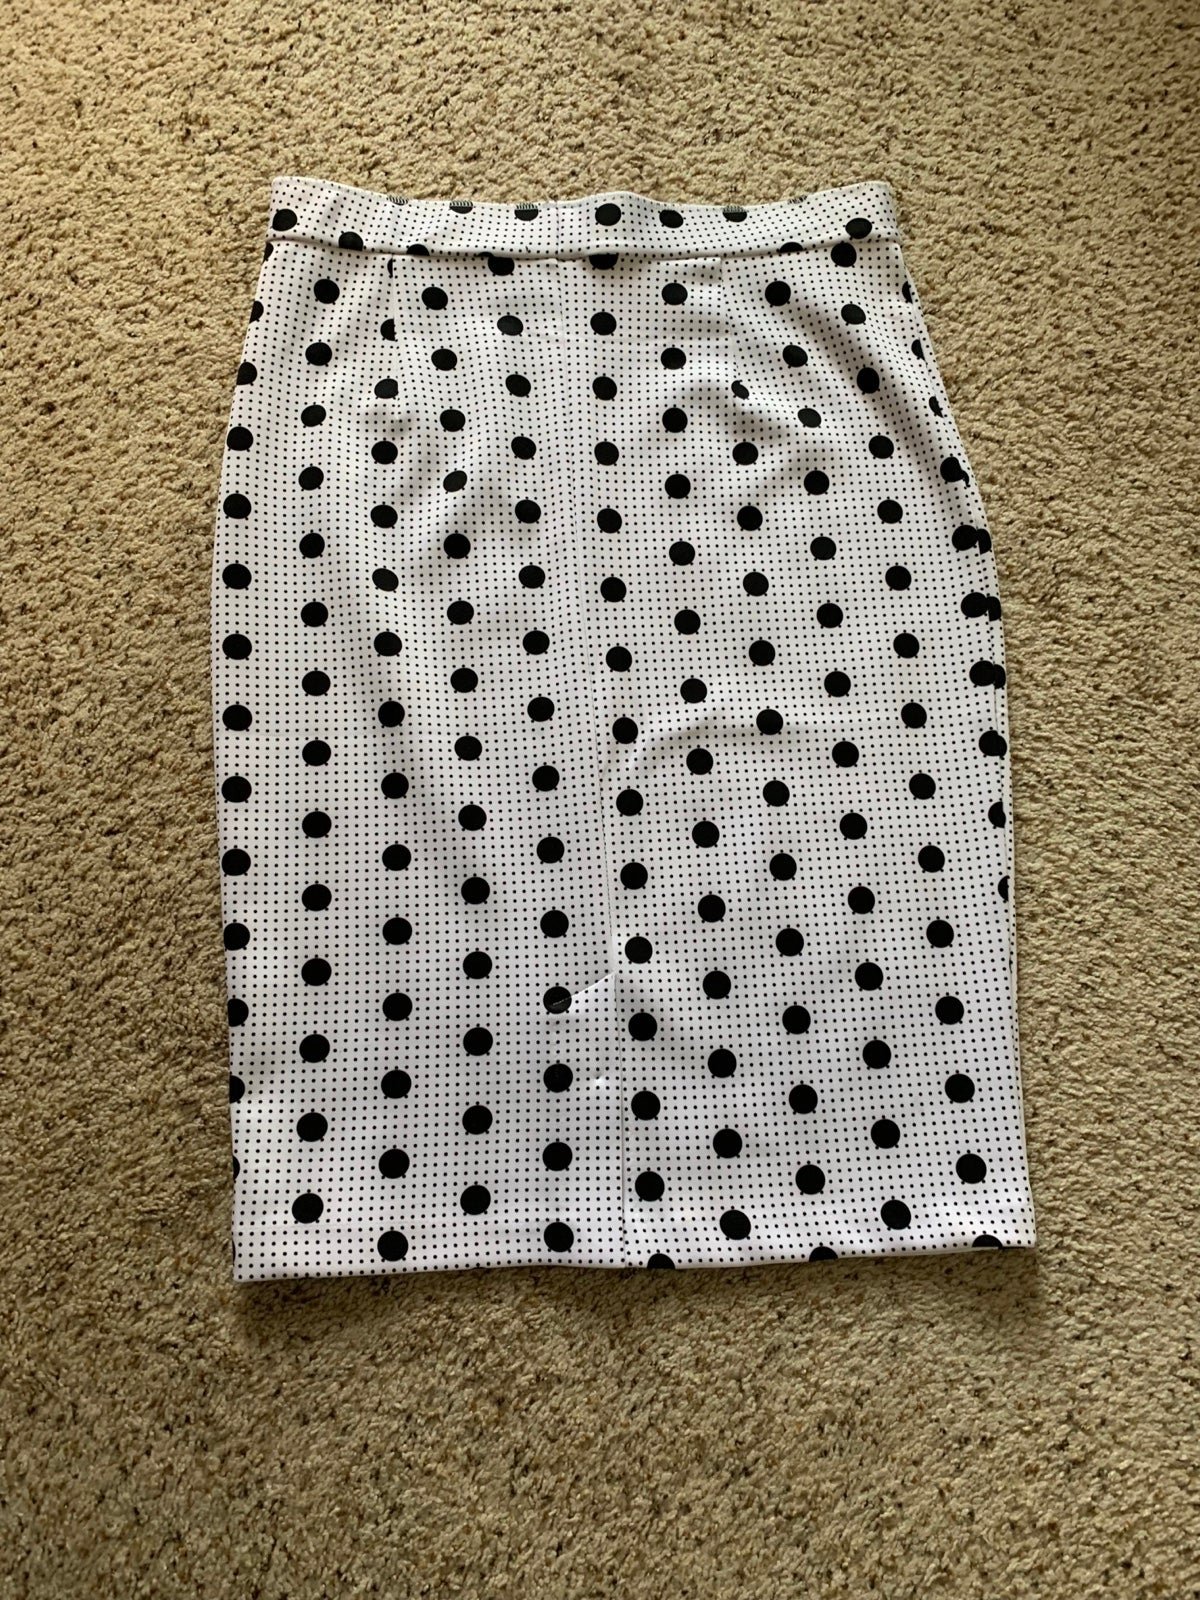 Stylish skirt homemade woman’s size large/ xlarge new condition LY2iDpNFL well sale